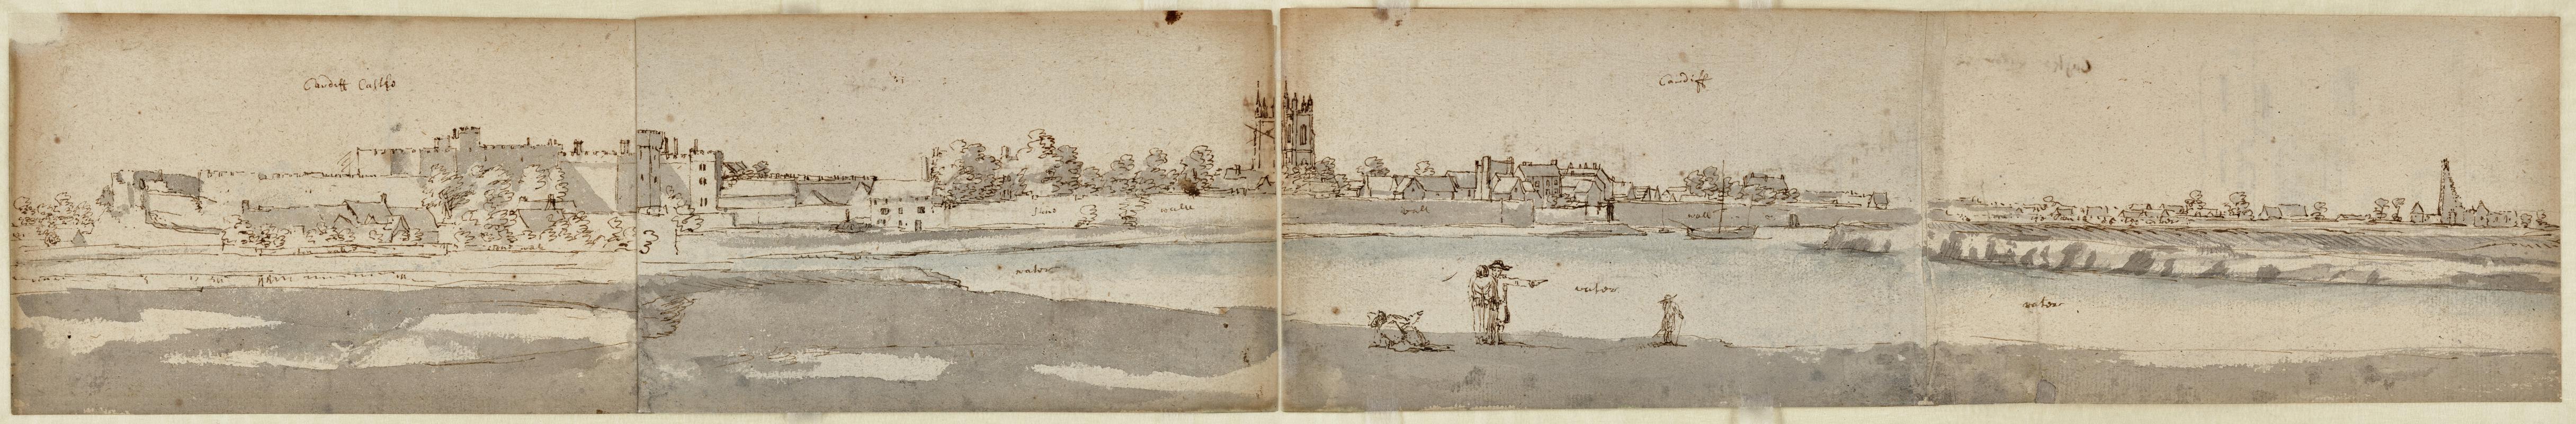 Cardiff in 1678 [digital composite of fold out pages as one image]